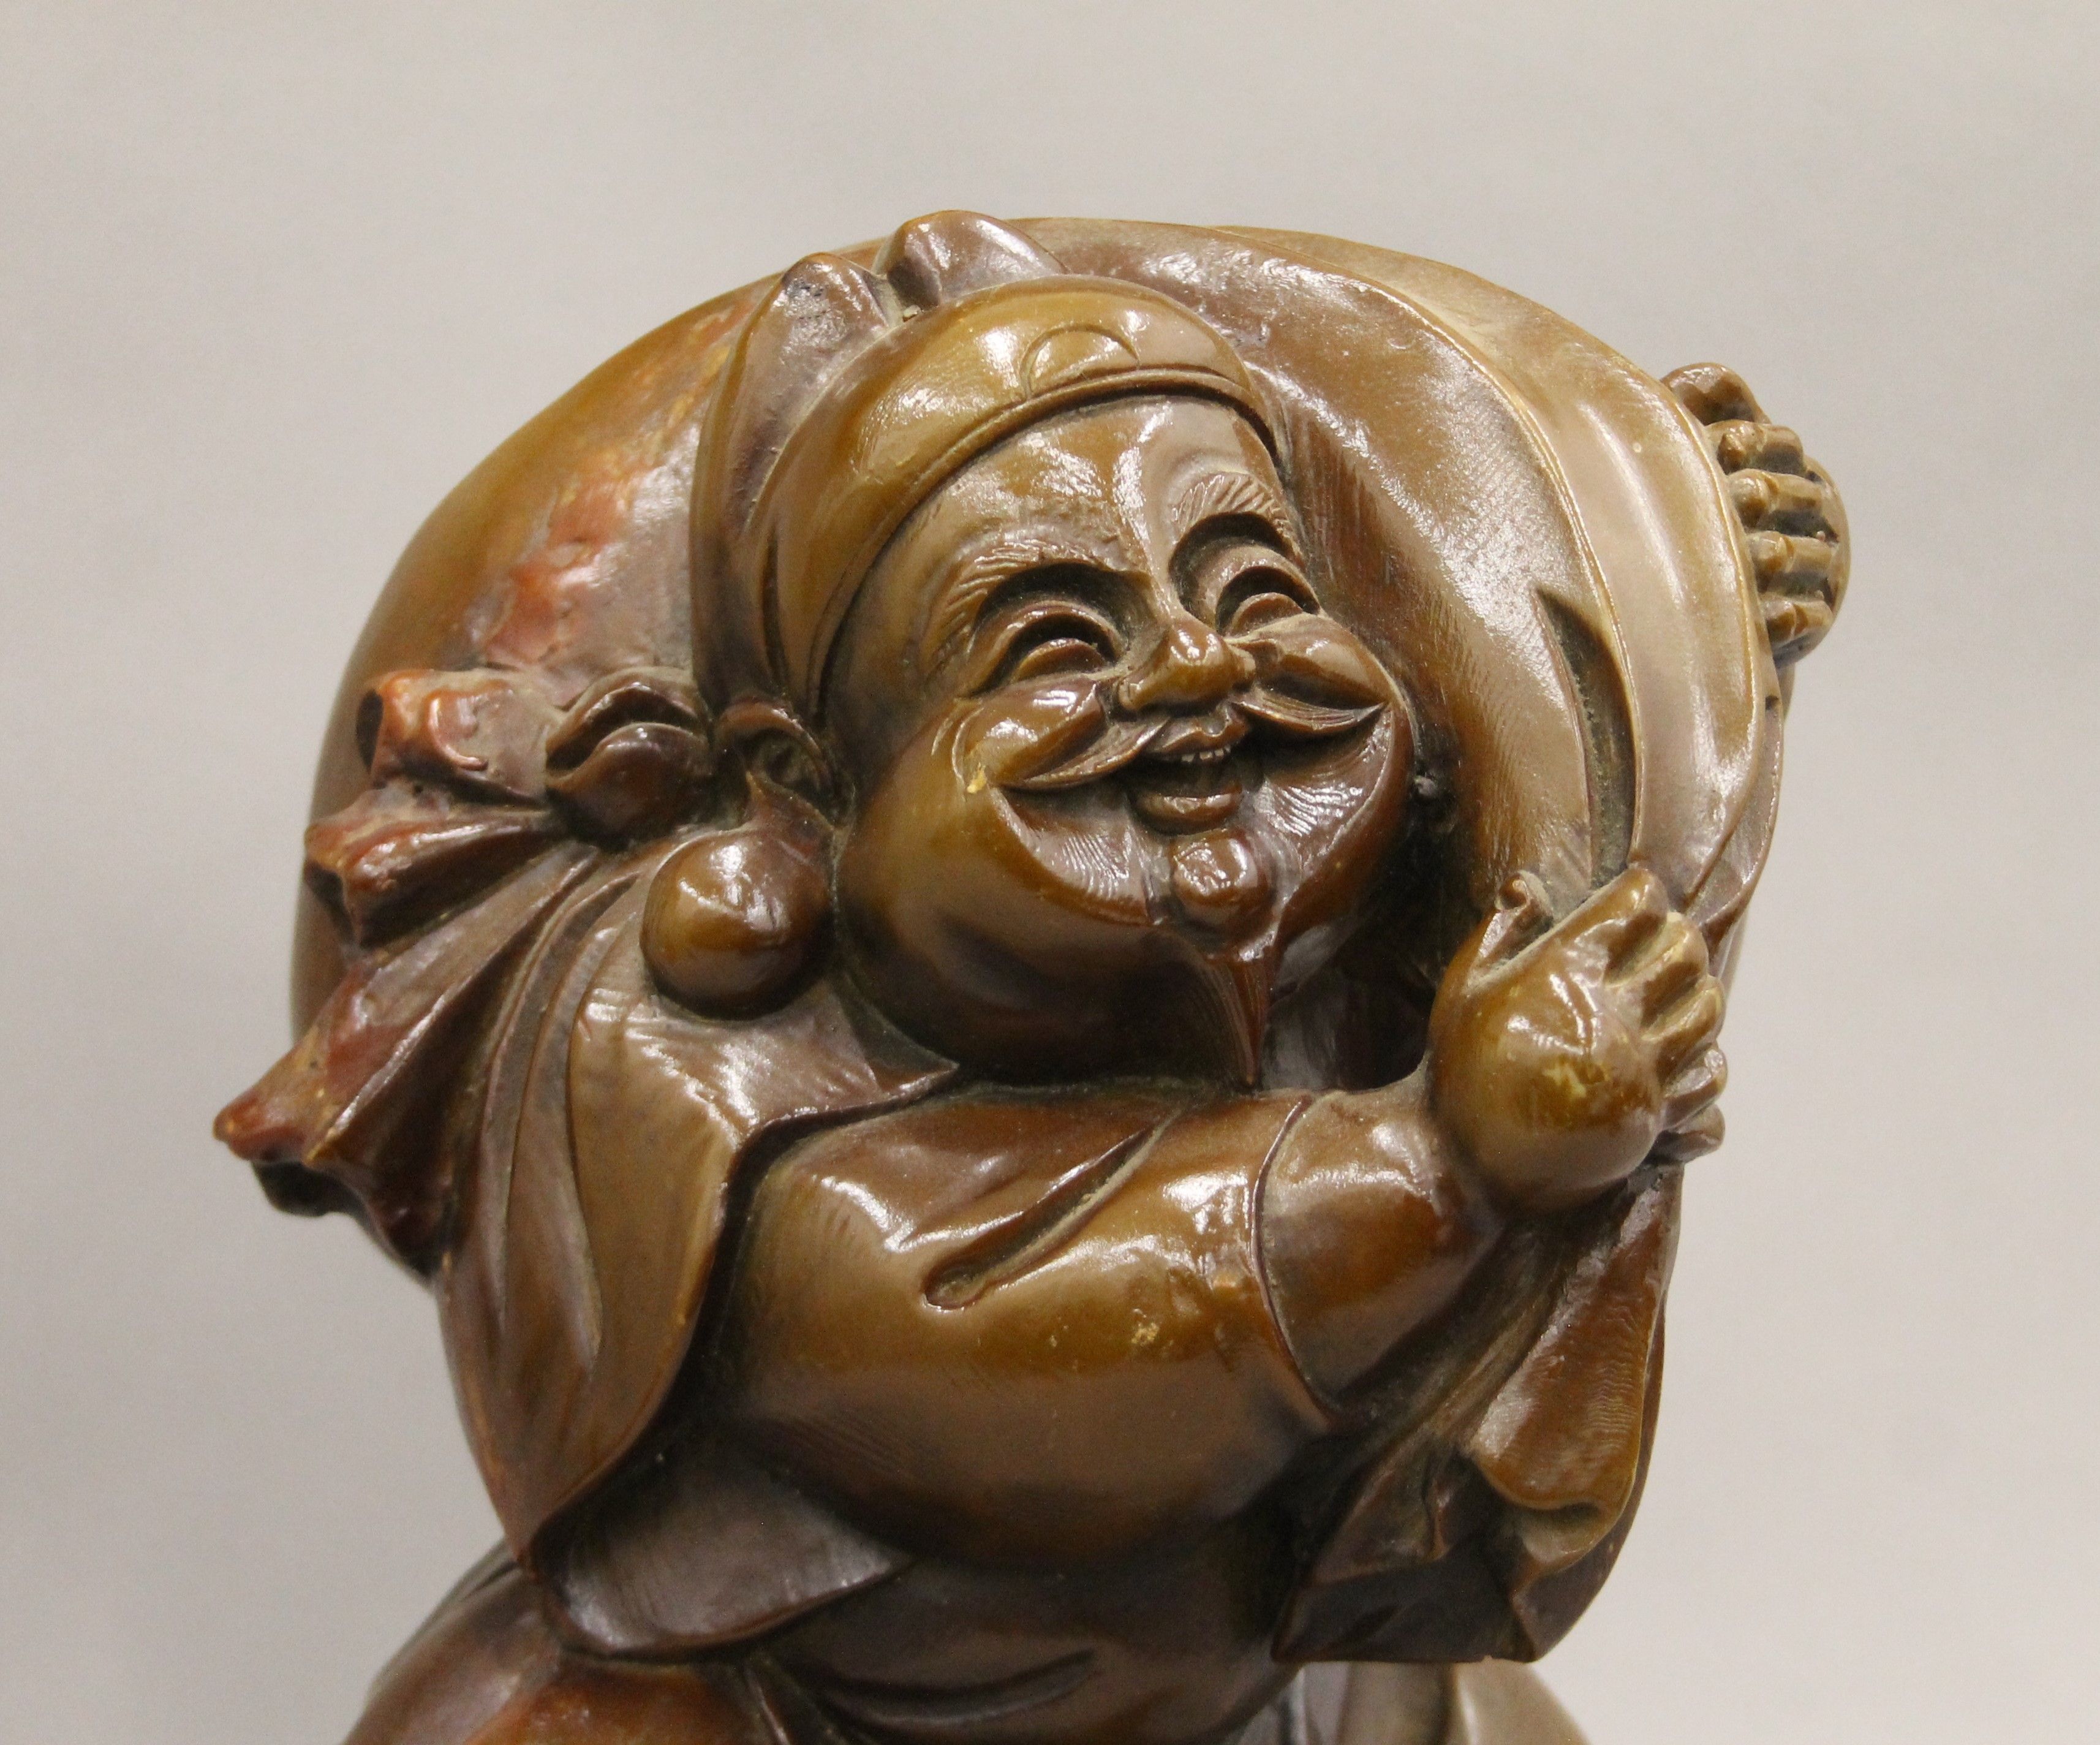 A model of a Japanese fisherman. 37 cm high. - Image 2 of 4